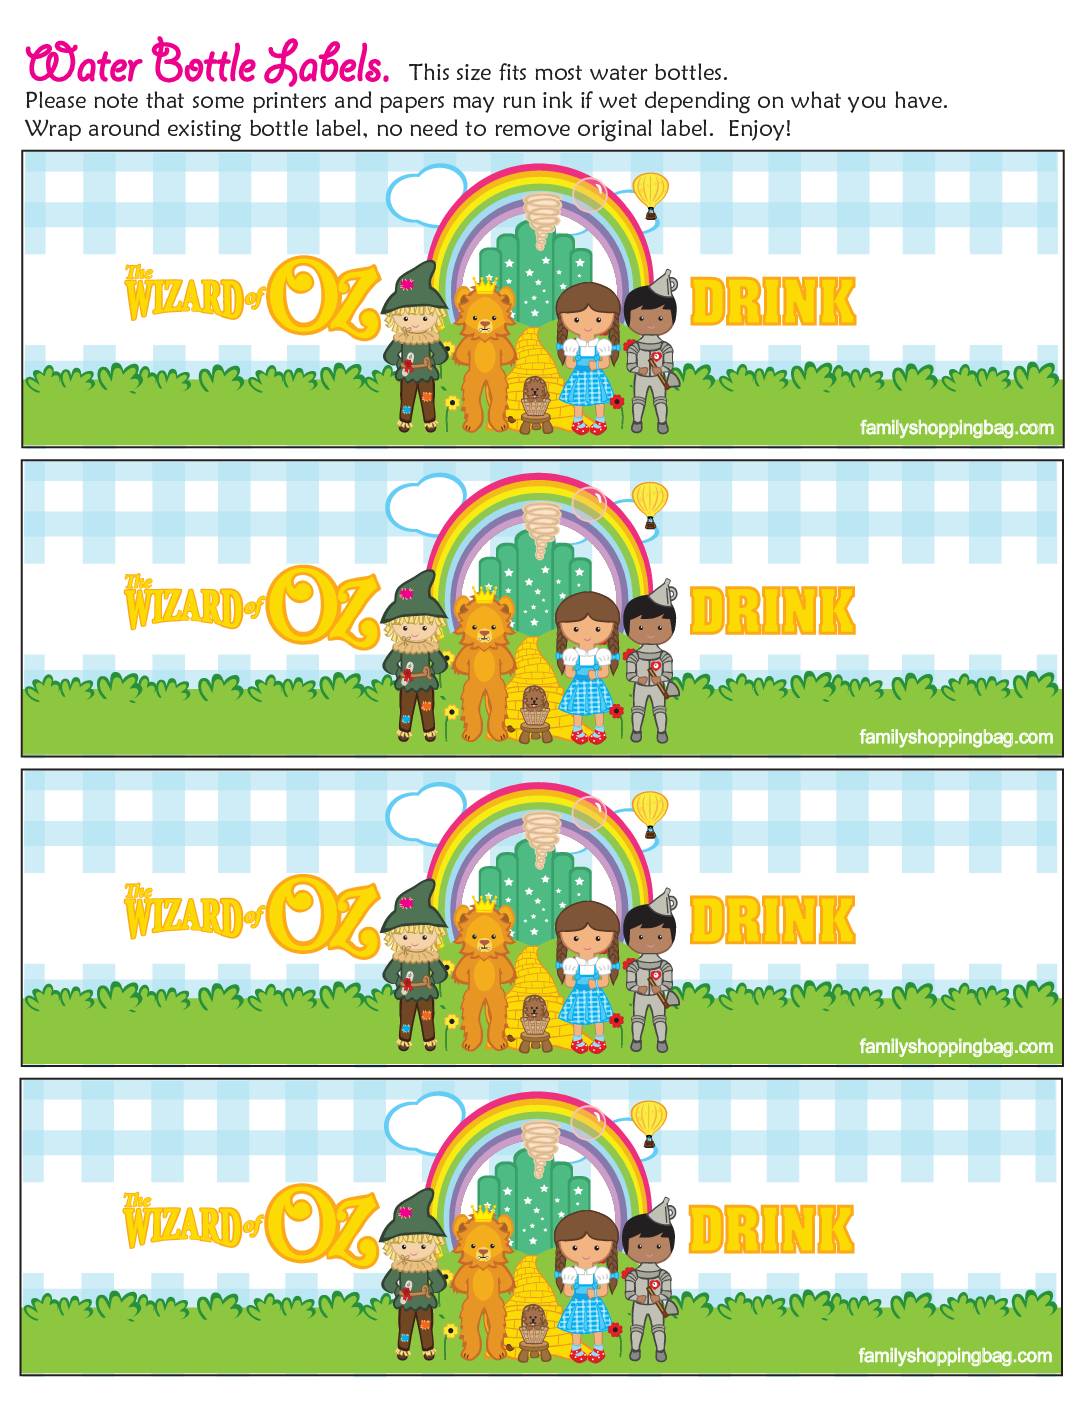 Water Label Wizard of Oz  pdf